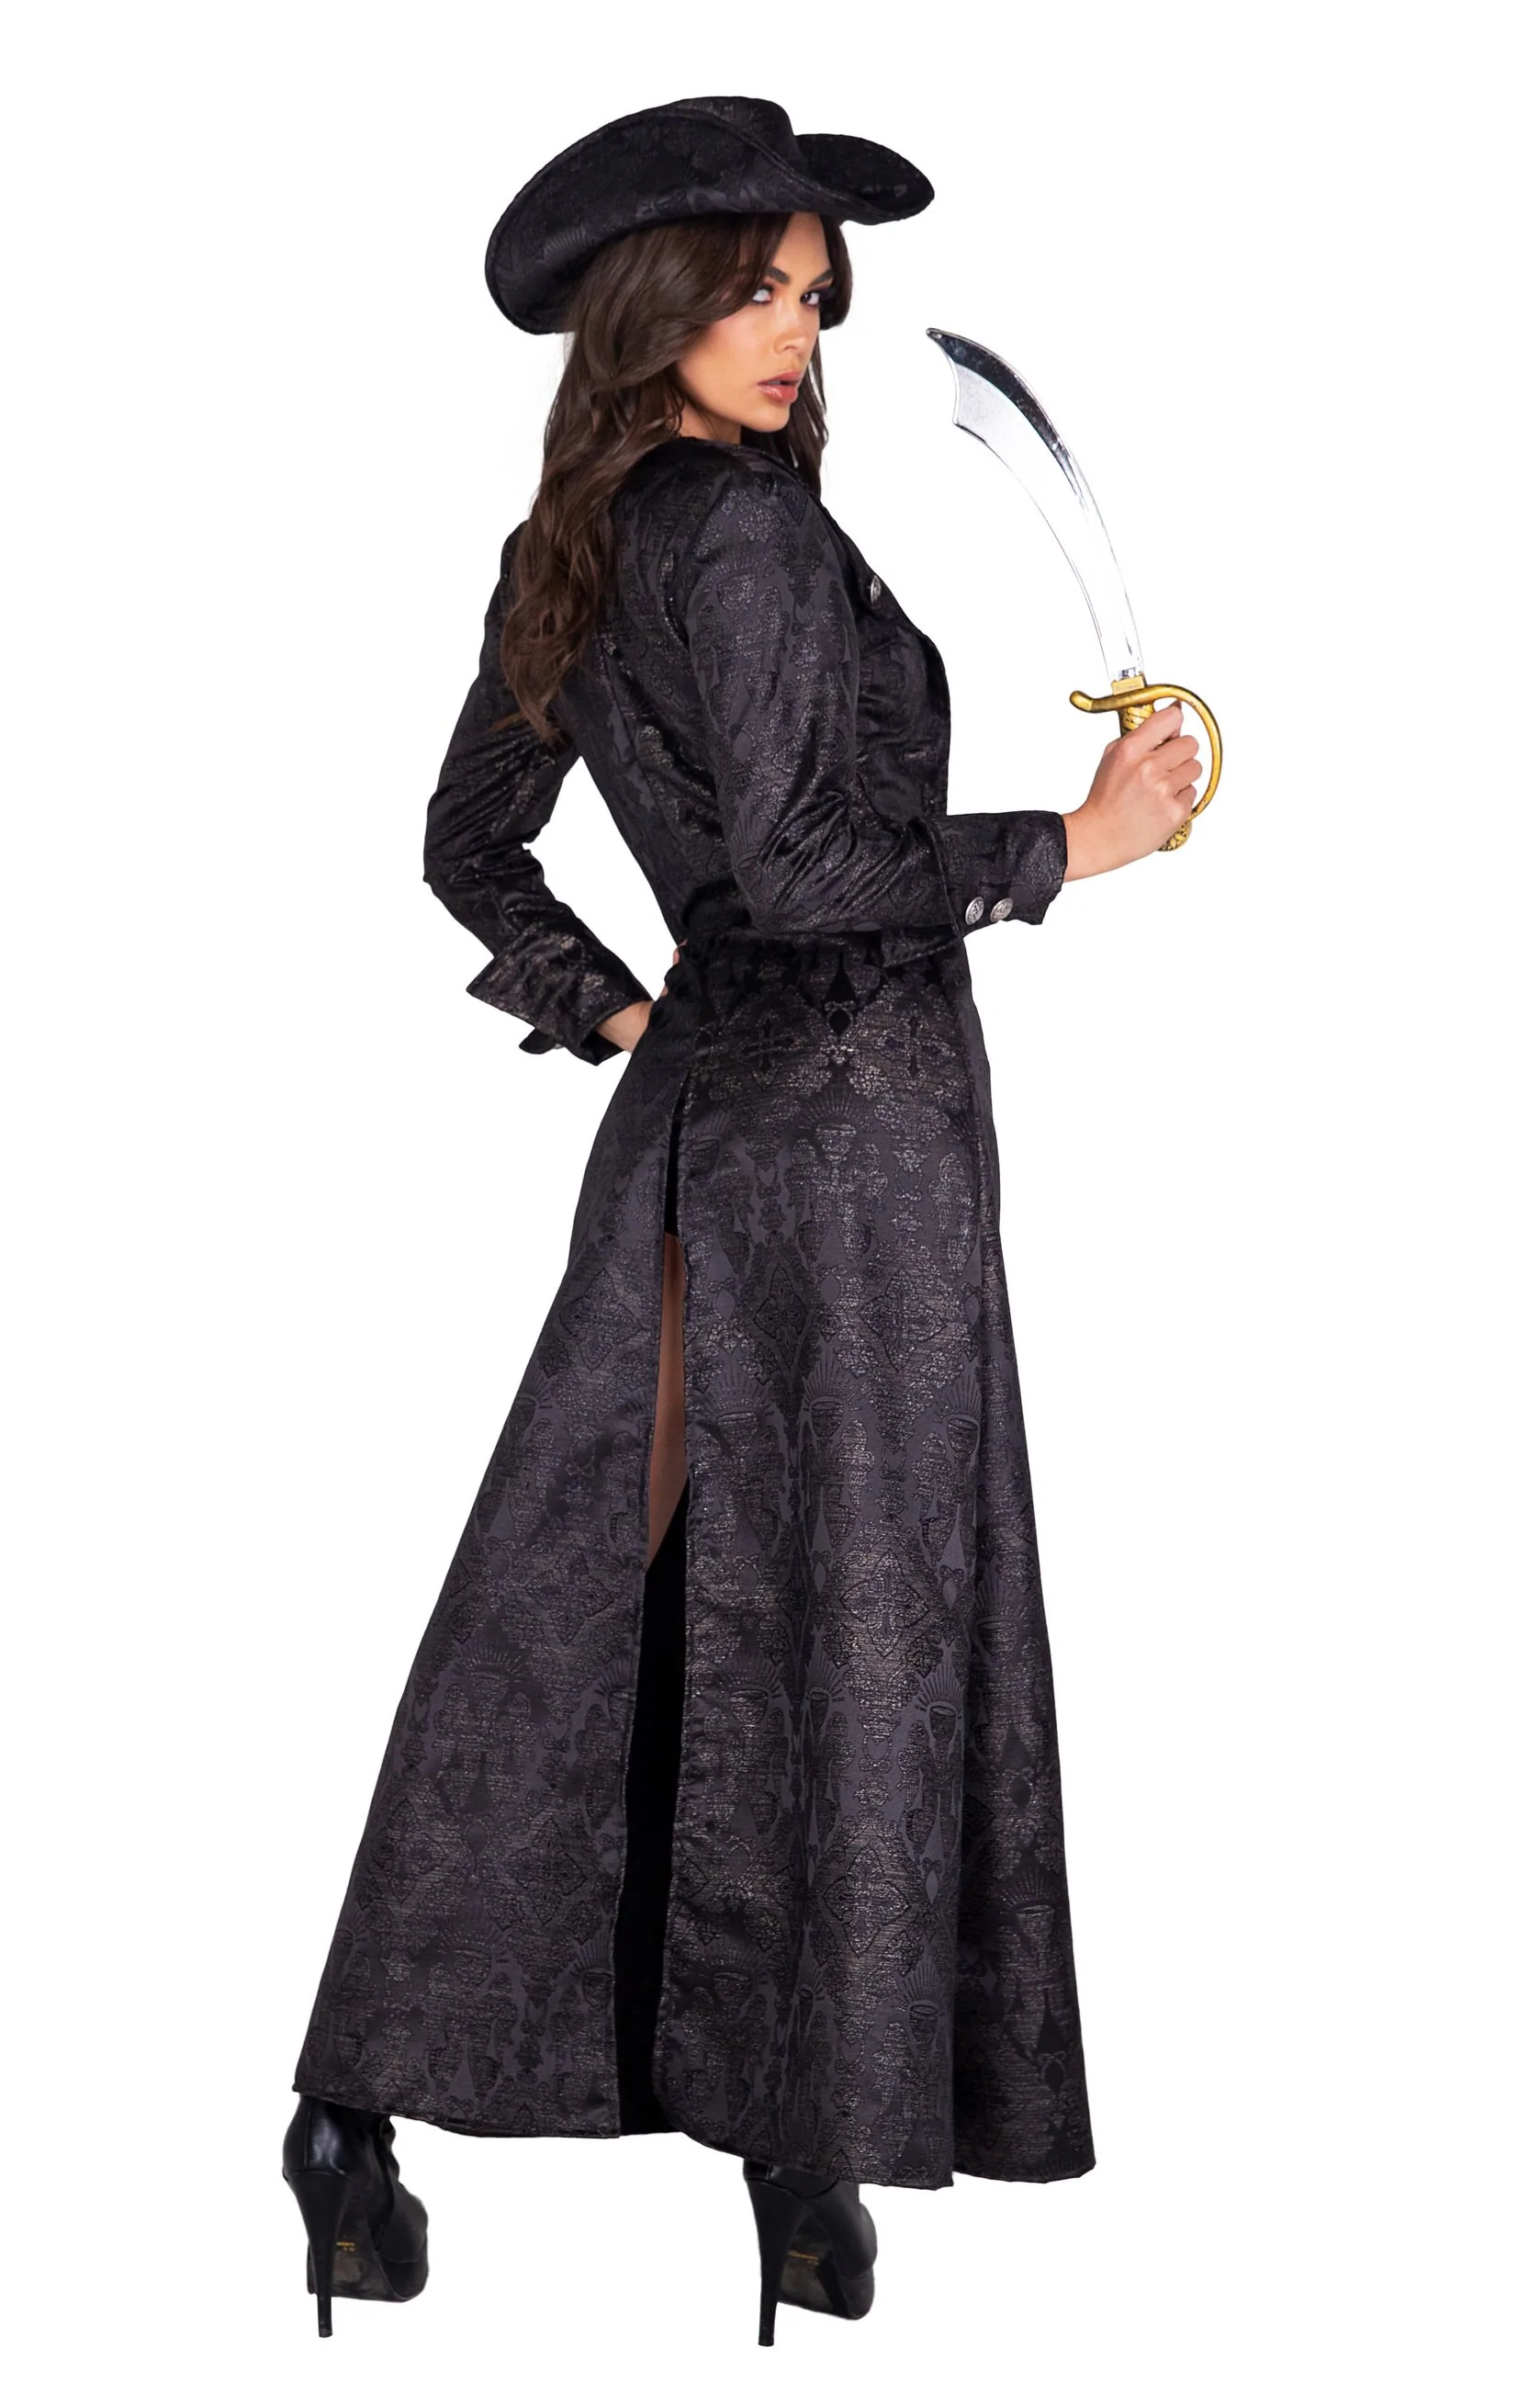 4PC CAPTIVATING PIRATE COSTUME Back View